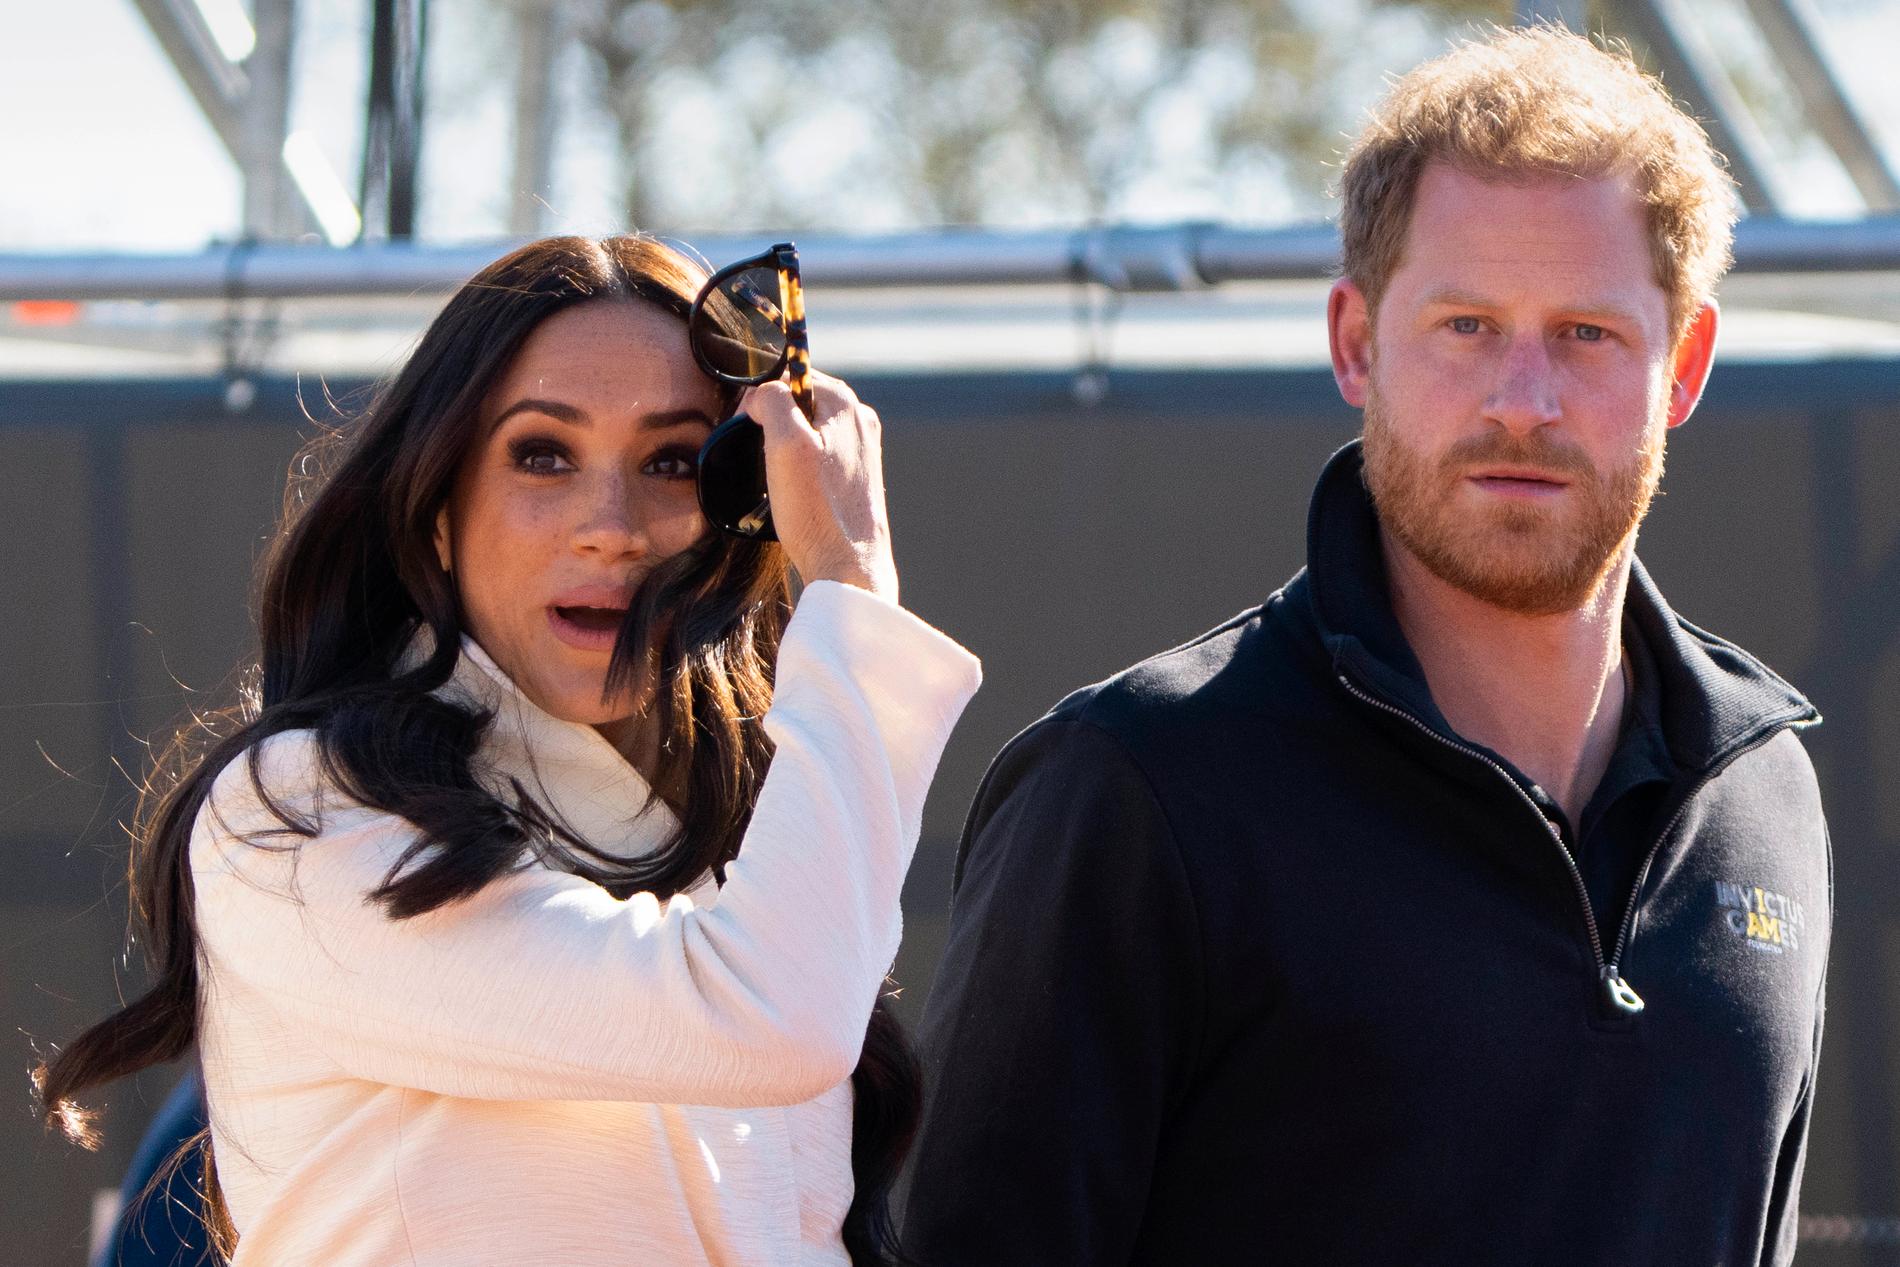 The lawsuit against Meghan Markle has been dismissed